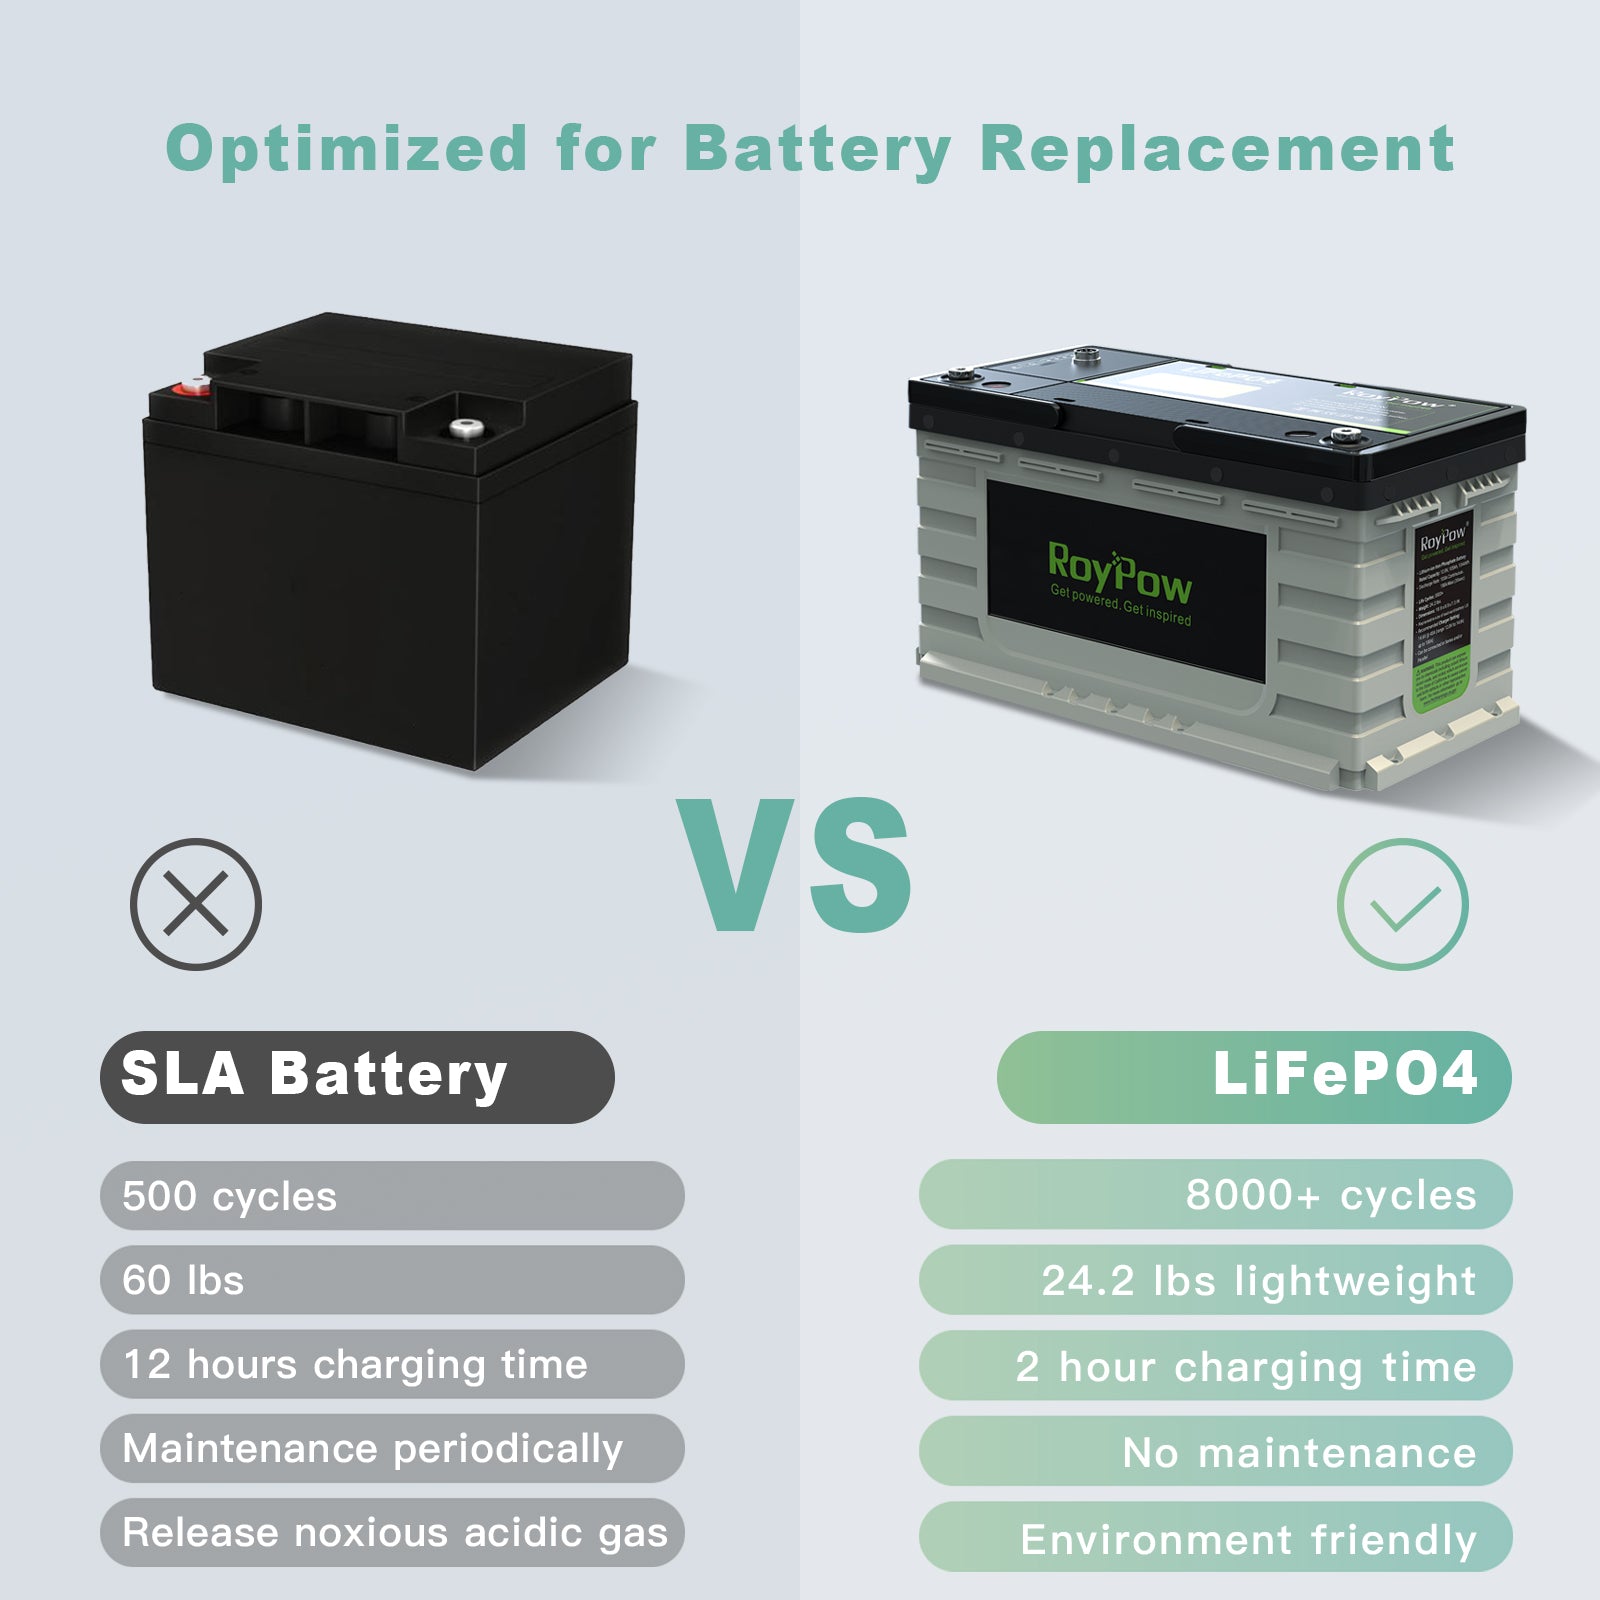 RoyPow 12V 105AH LiFePO4 deep cycle rechargeable battery